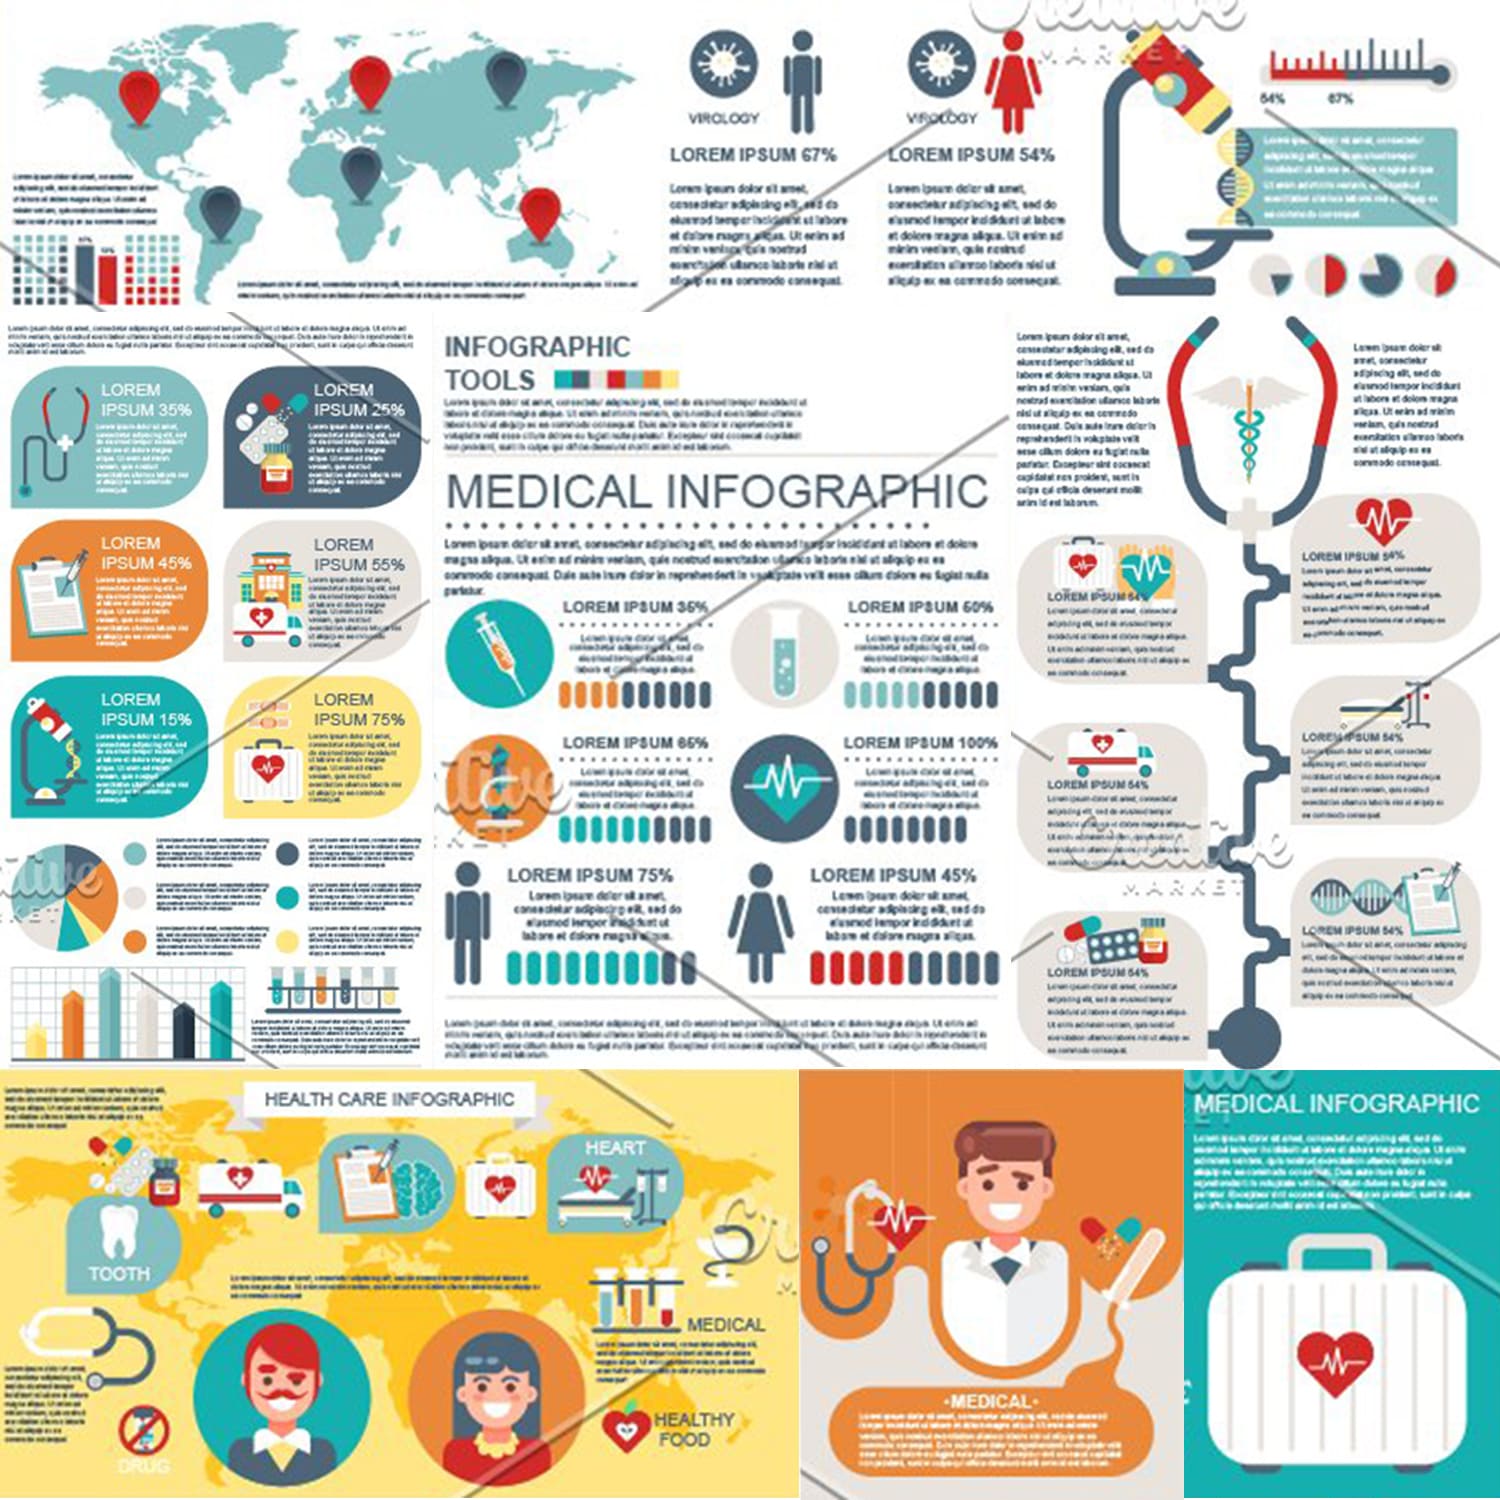 Medical Infographic Elements cover image.